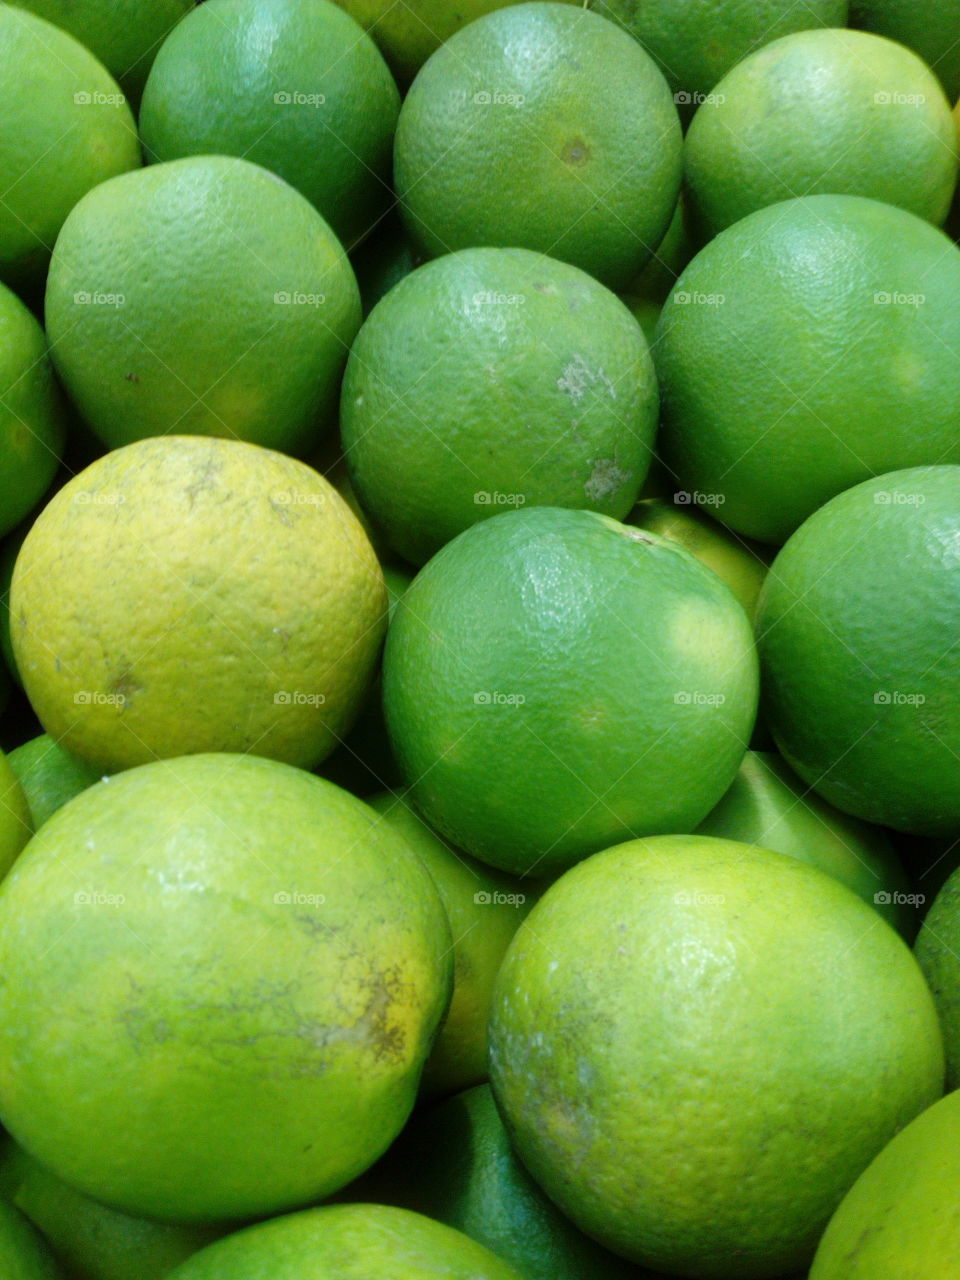 Green oranges from Indonesia